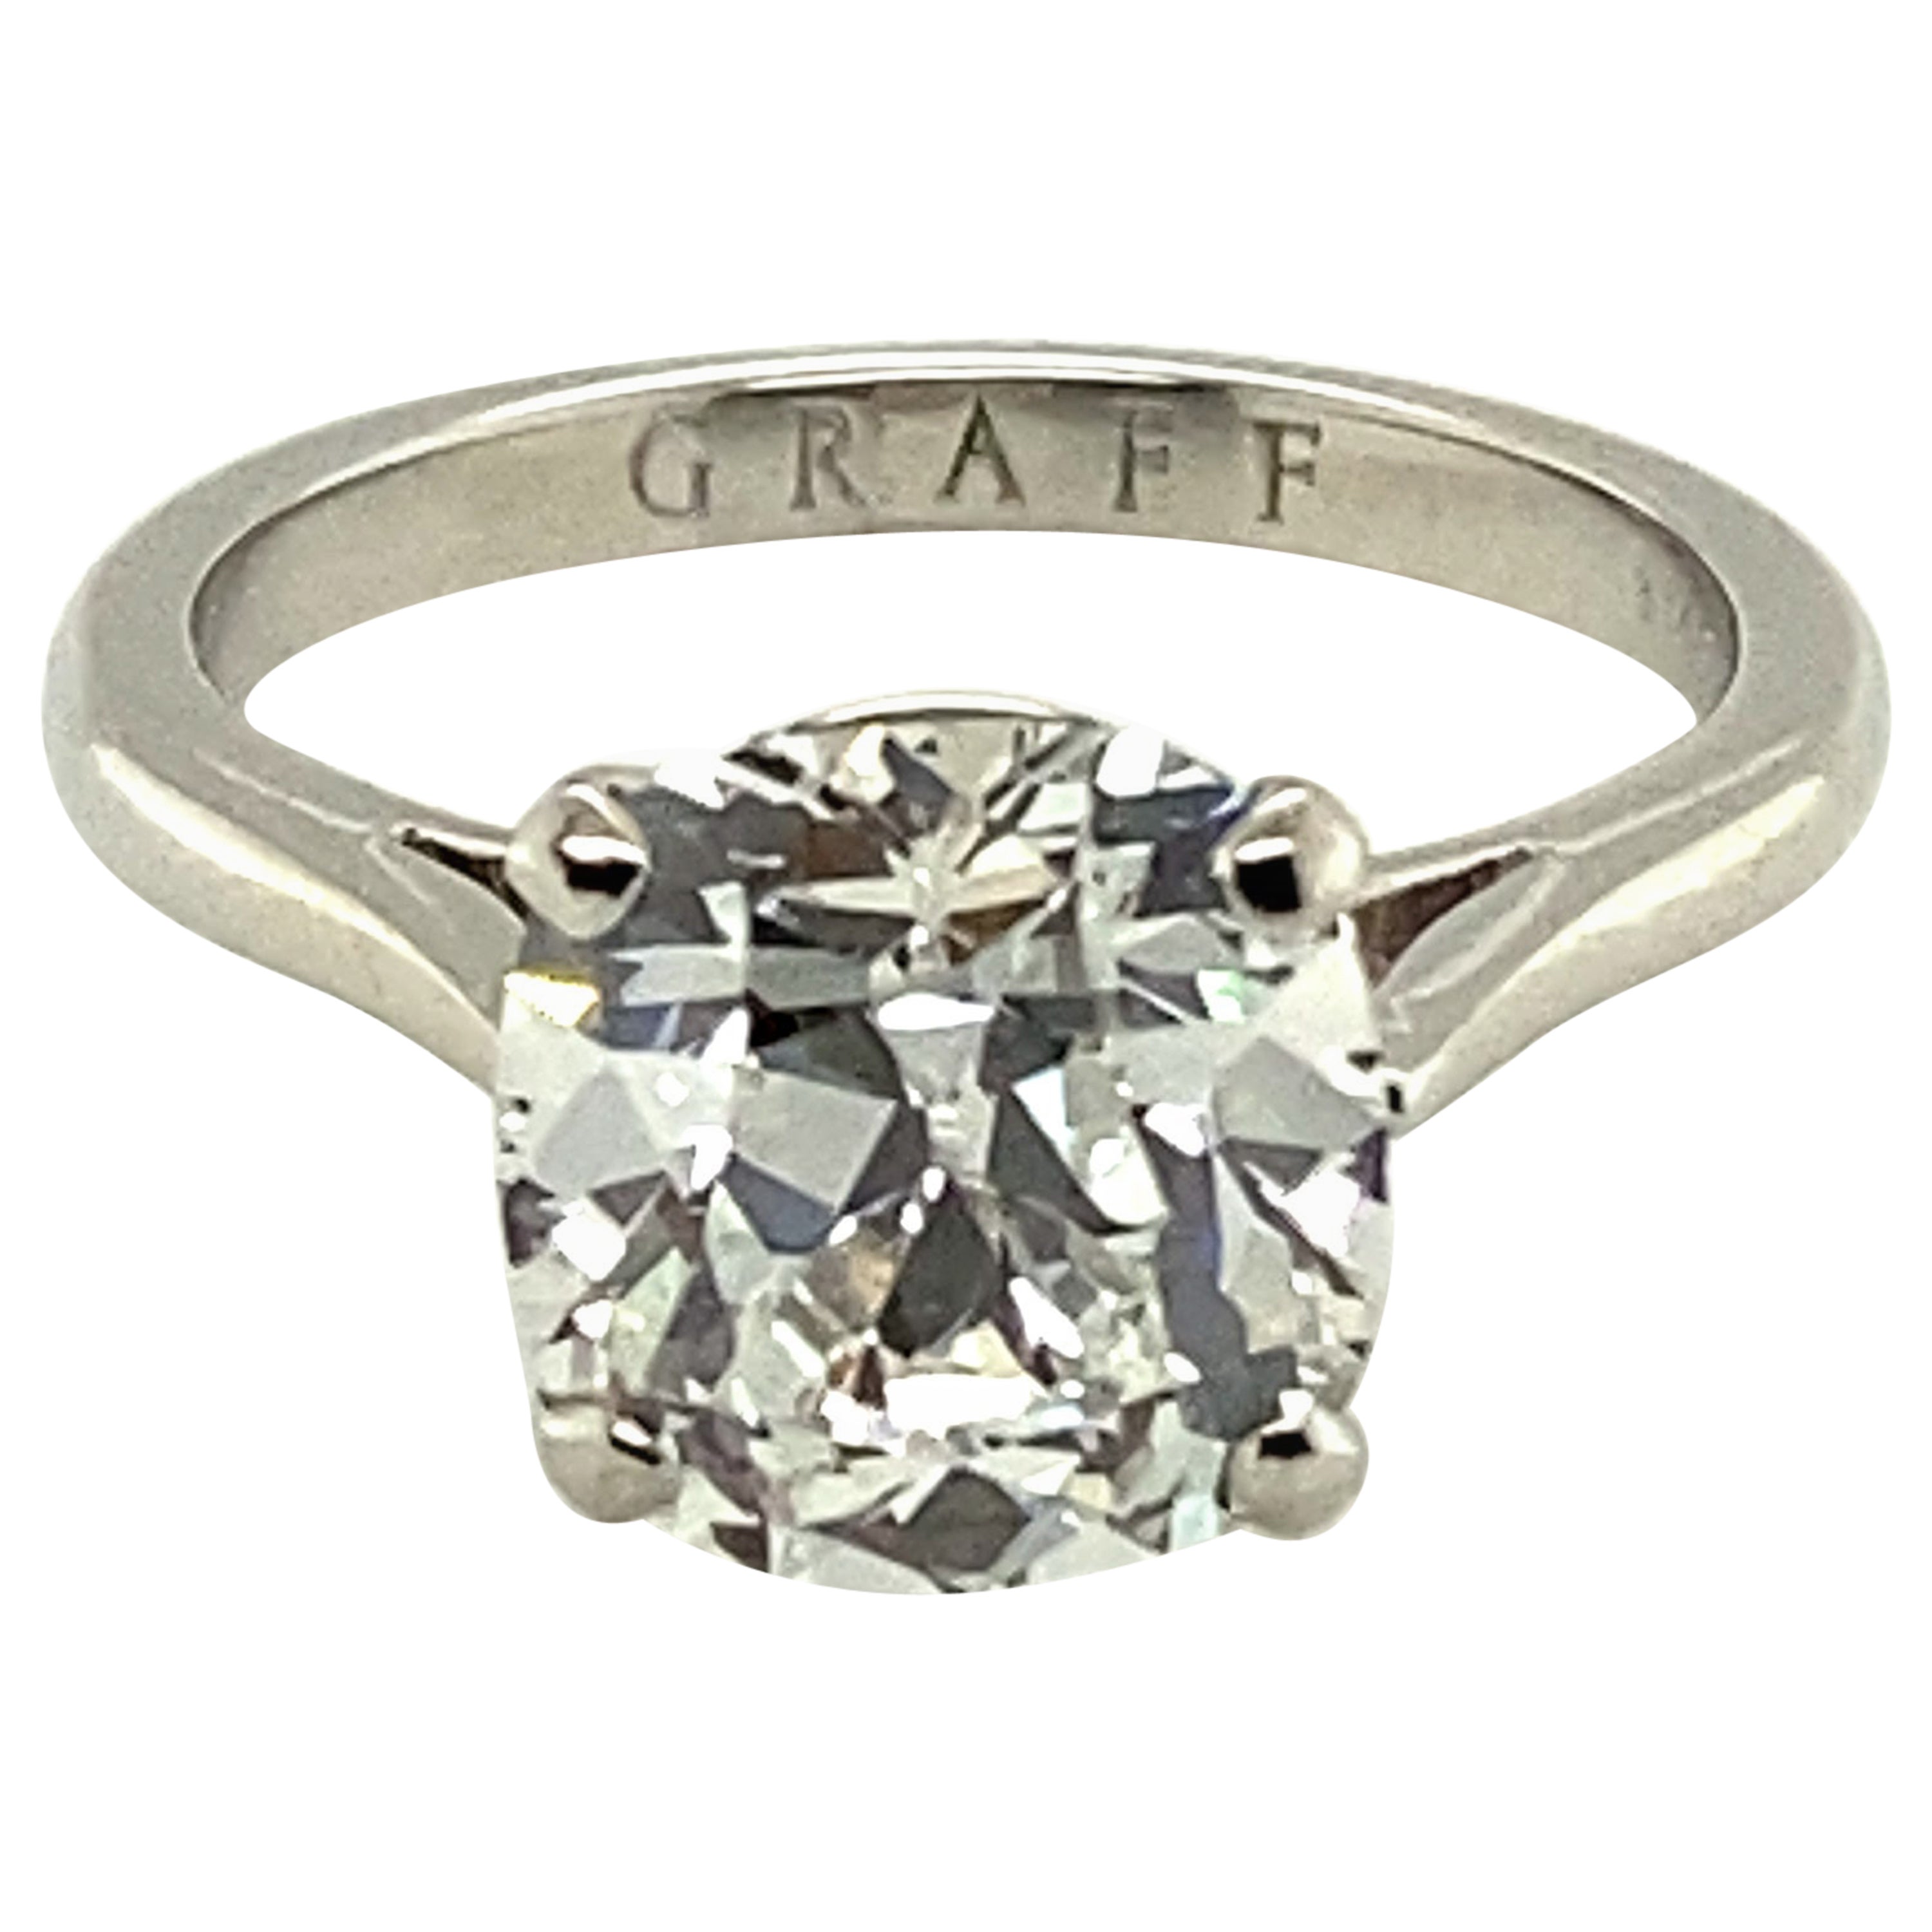 Graff Ring in 18 Karat White Gold Set with a 3.14 Ct Cushion-Shaped Diamond